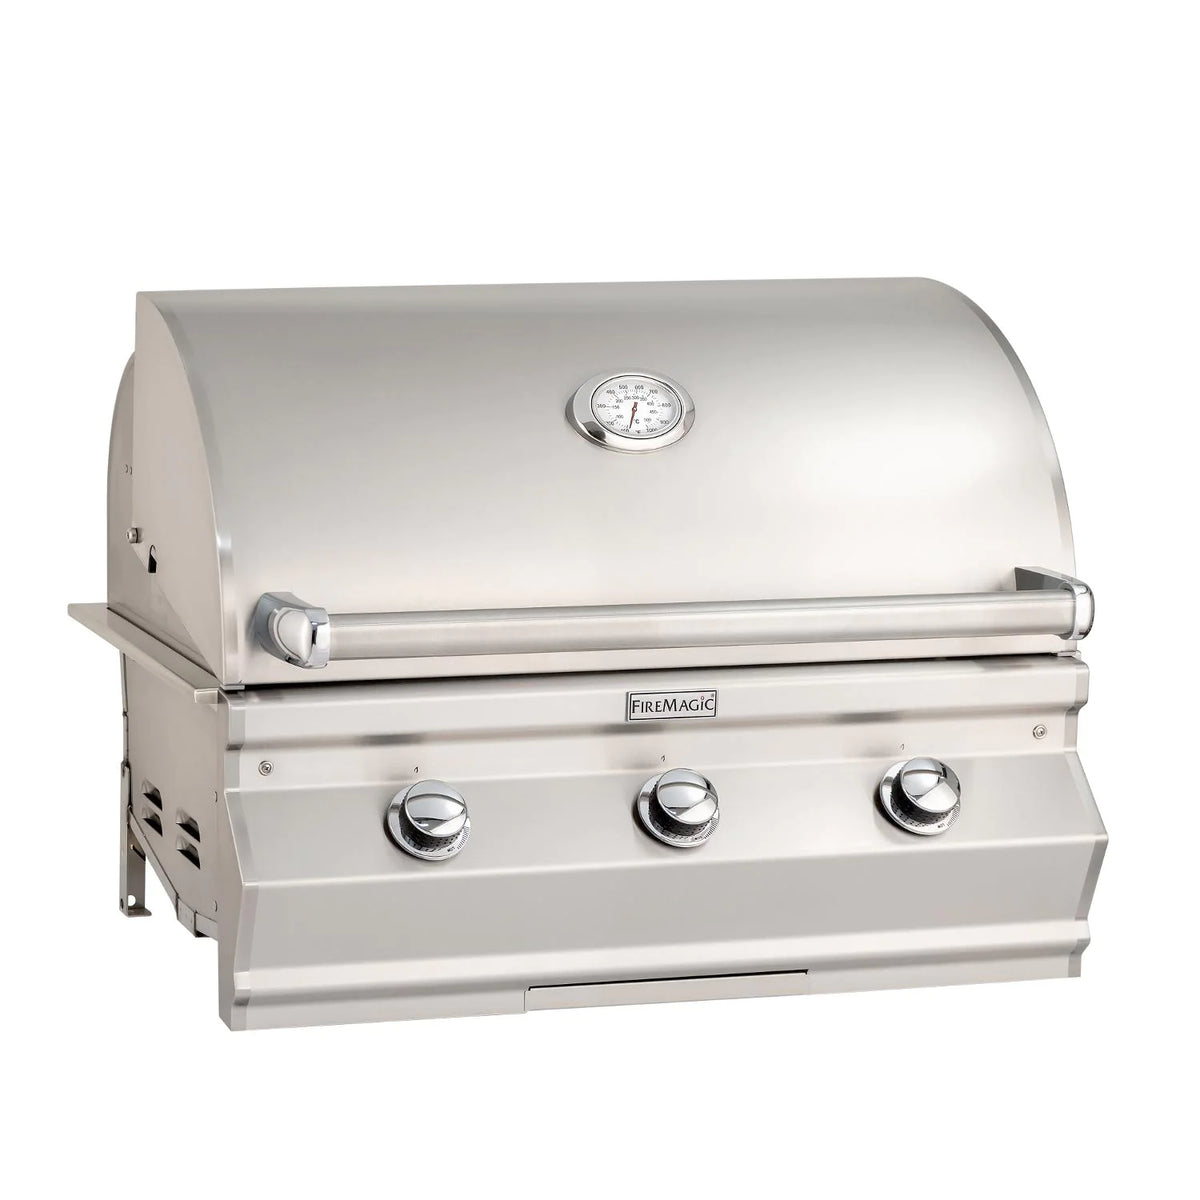 Fire Magic Choice 30 Inch 3 Burner Built-In Gas Grill with Analog Thermometer